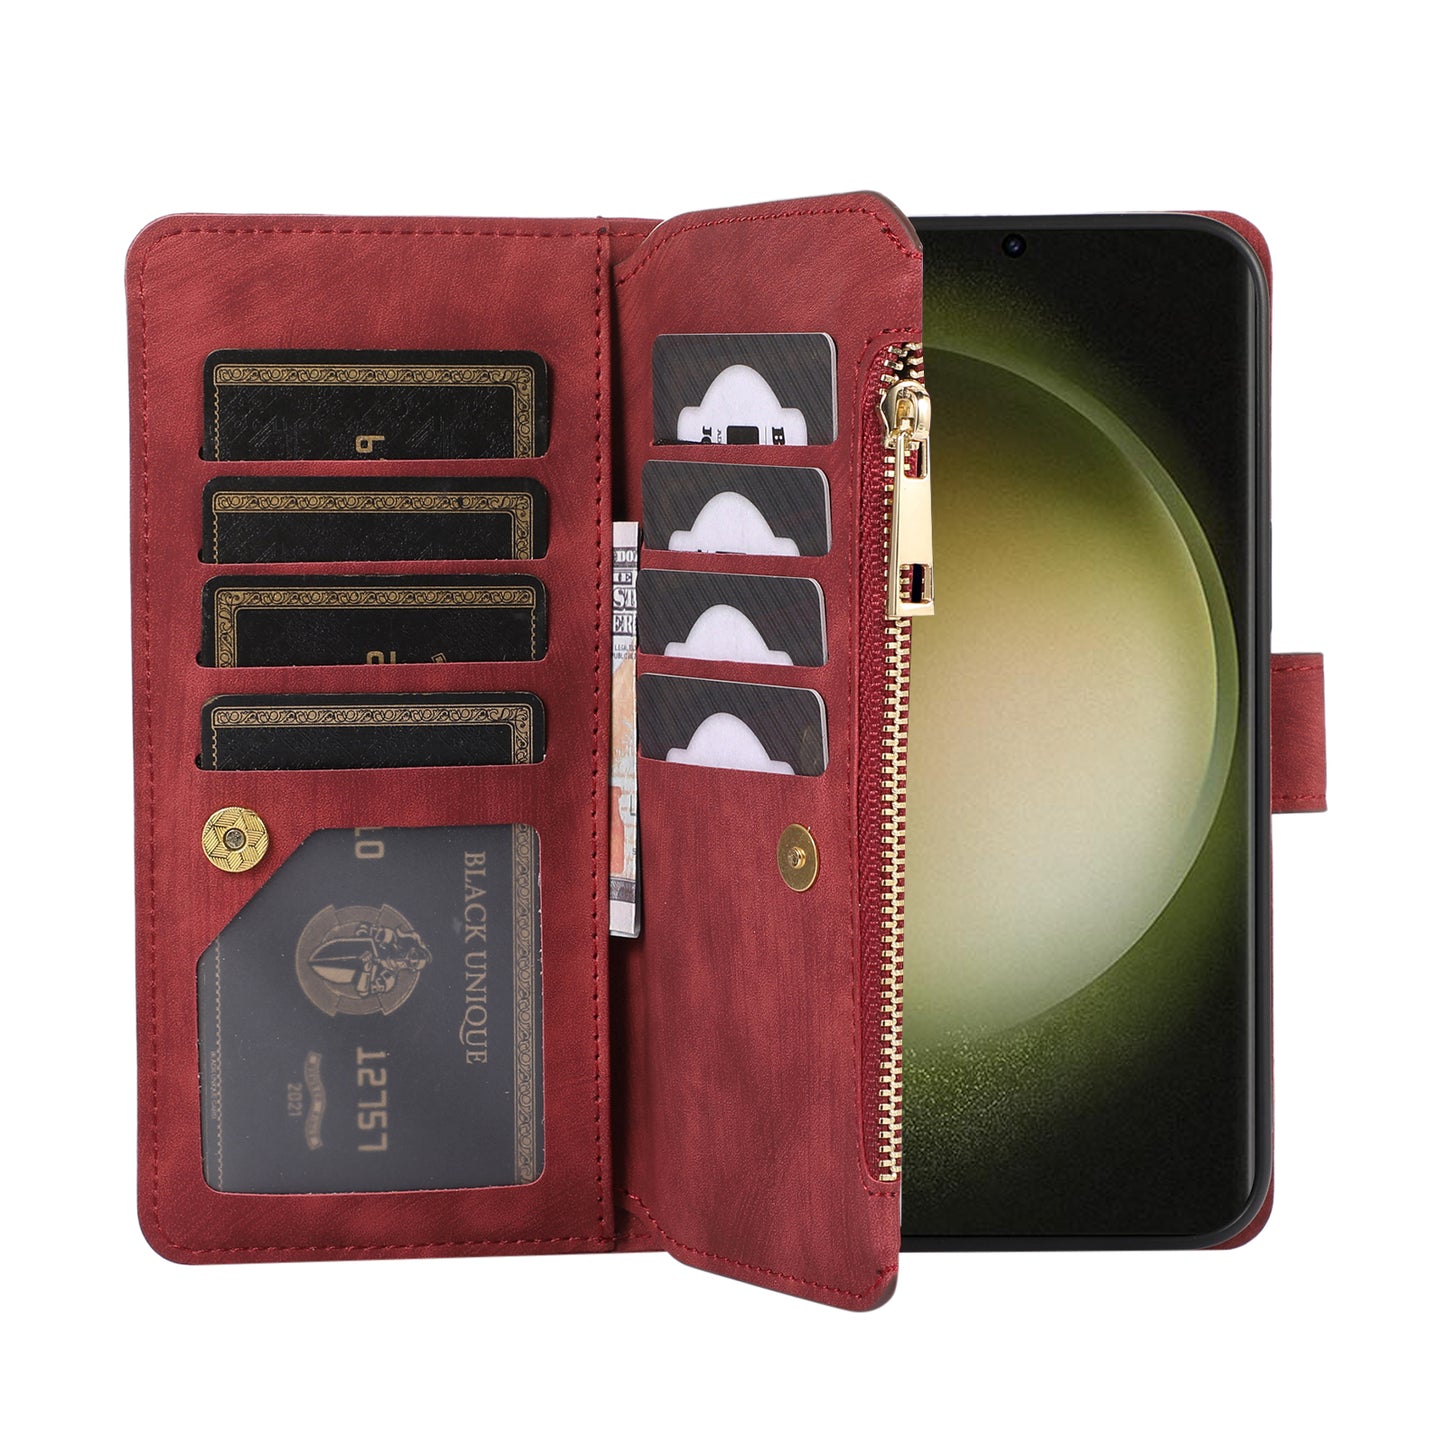 Rhombus Wallet Purse Handbag Red Leather Phone Cover - For Samsung Galaxy S24 Ultra